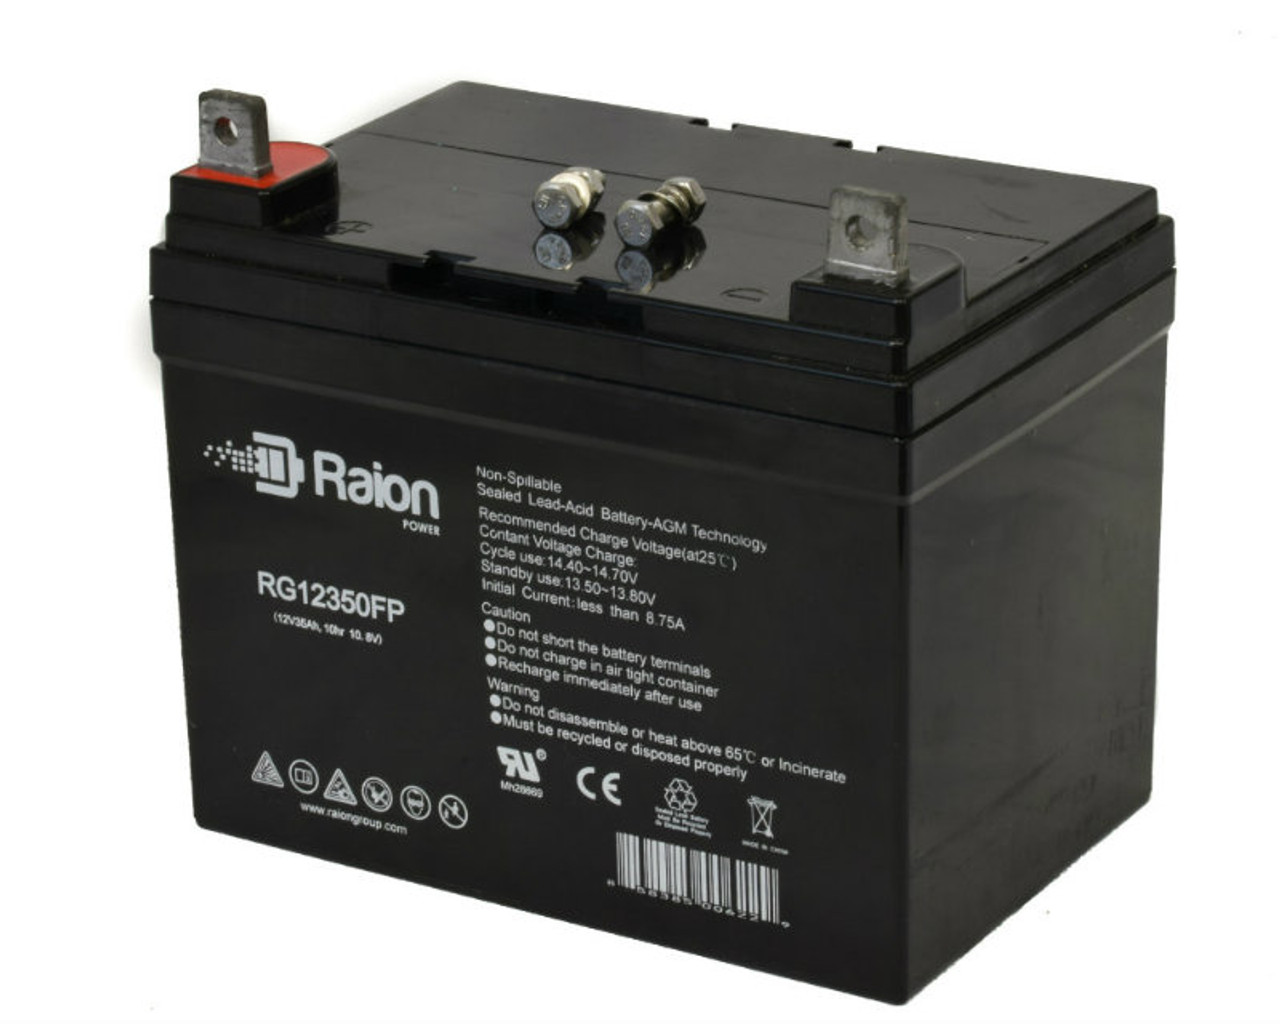 Raion Power Replacement 12V 35Ah RG12350FP Battery for Wheel Horse 11-44